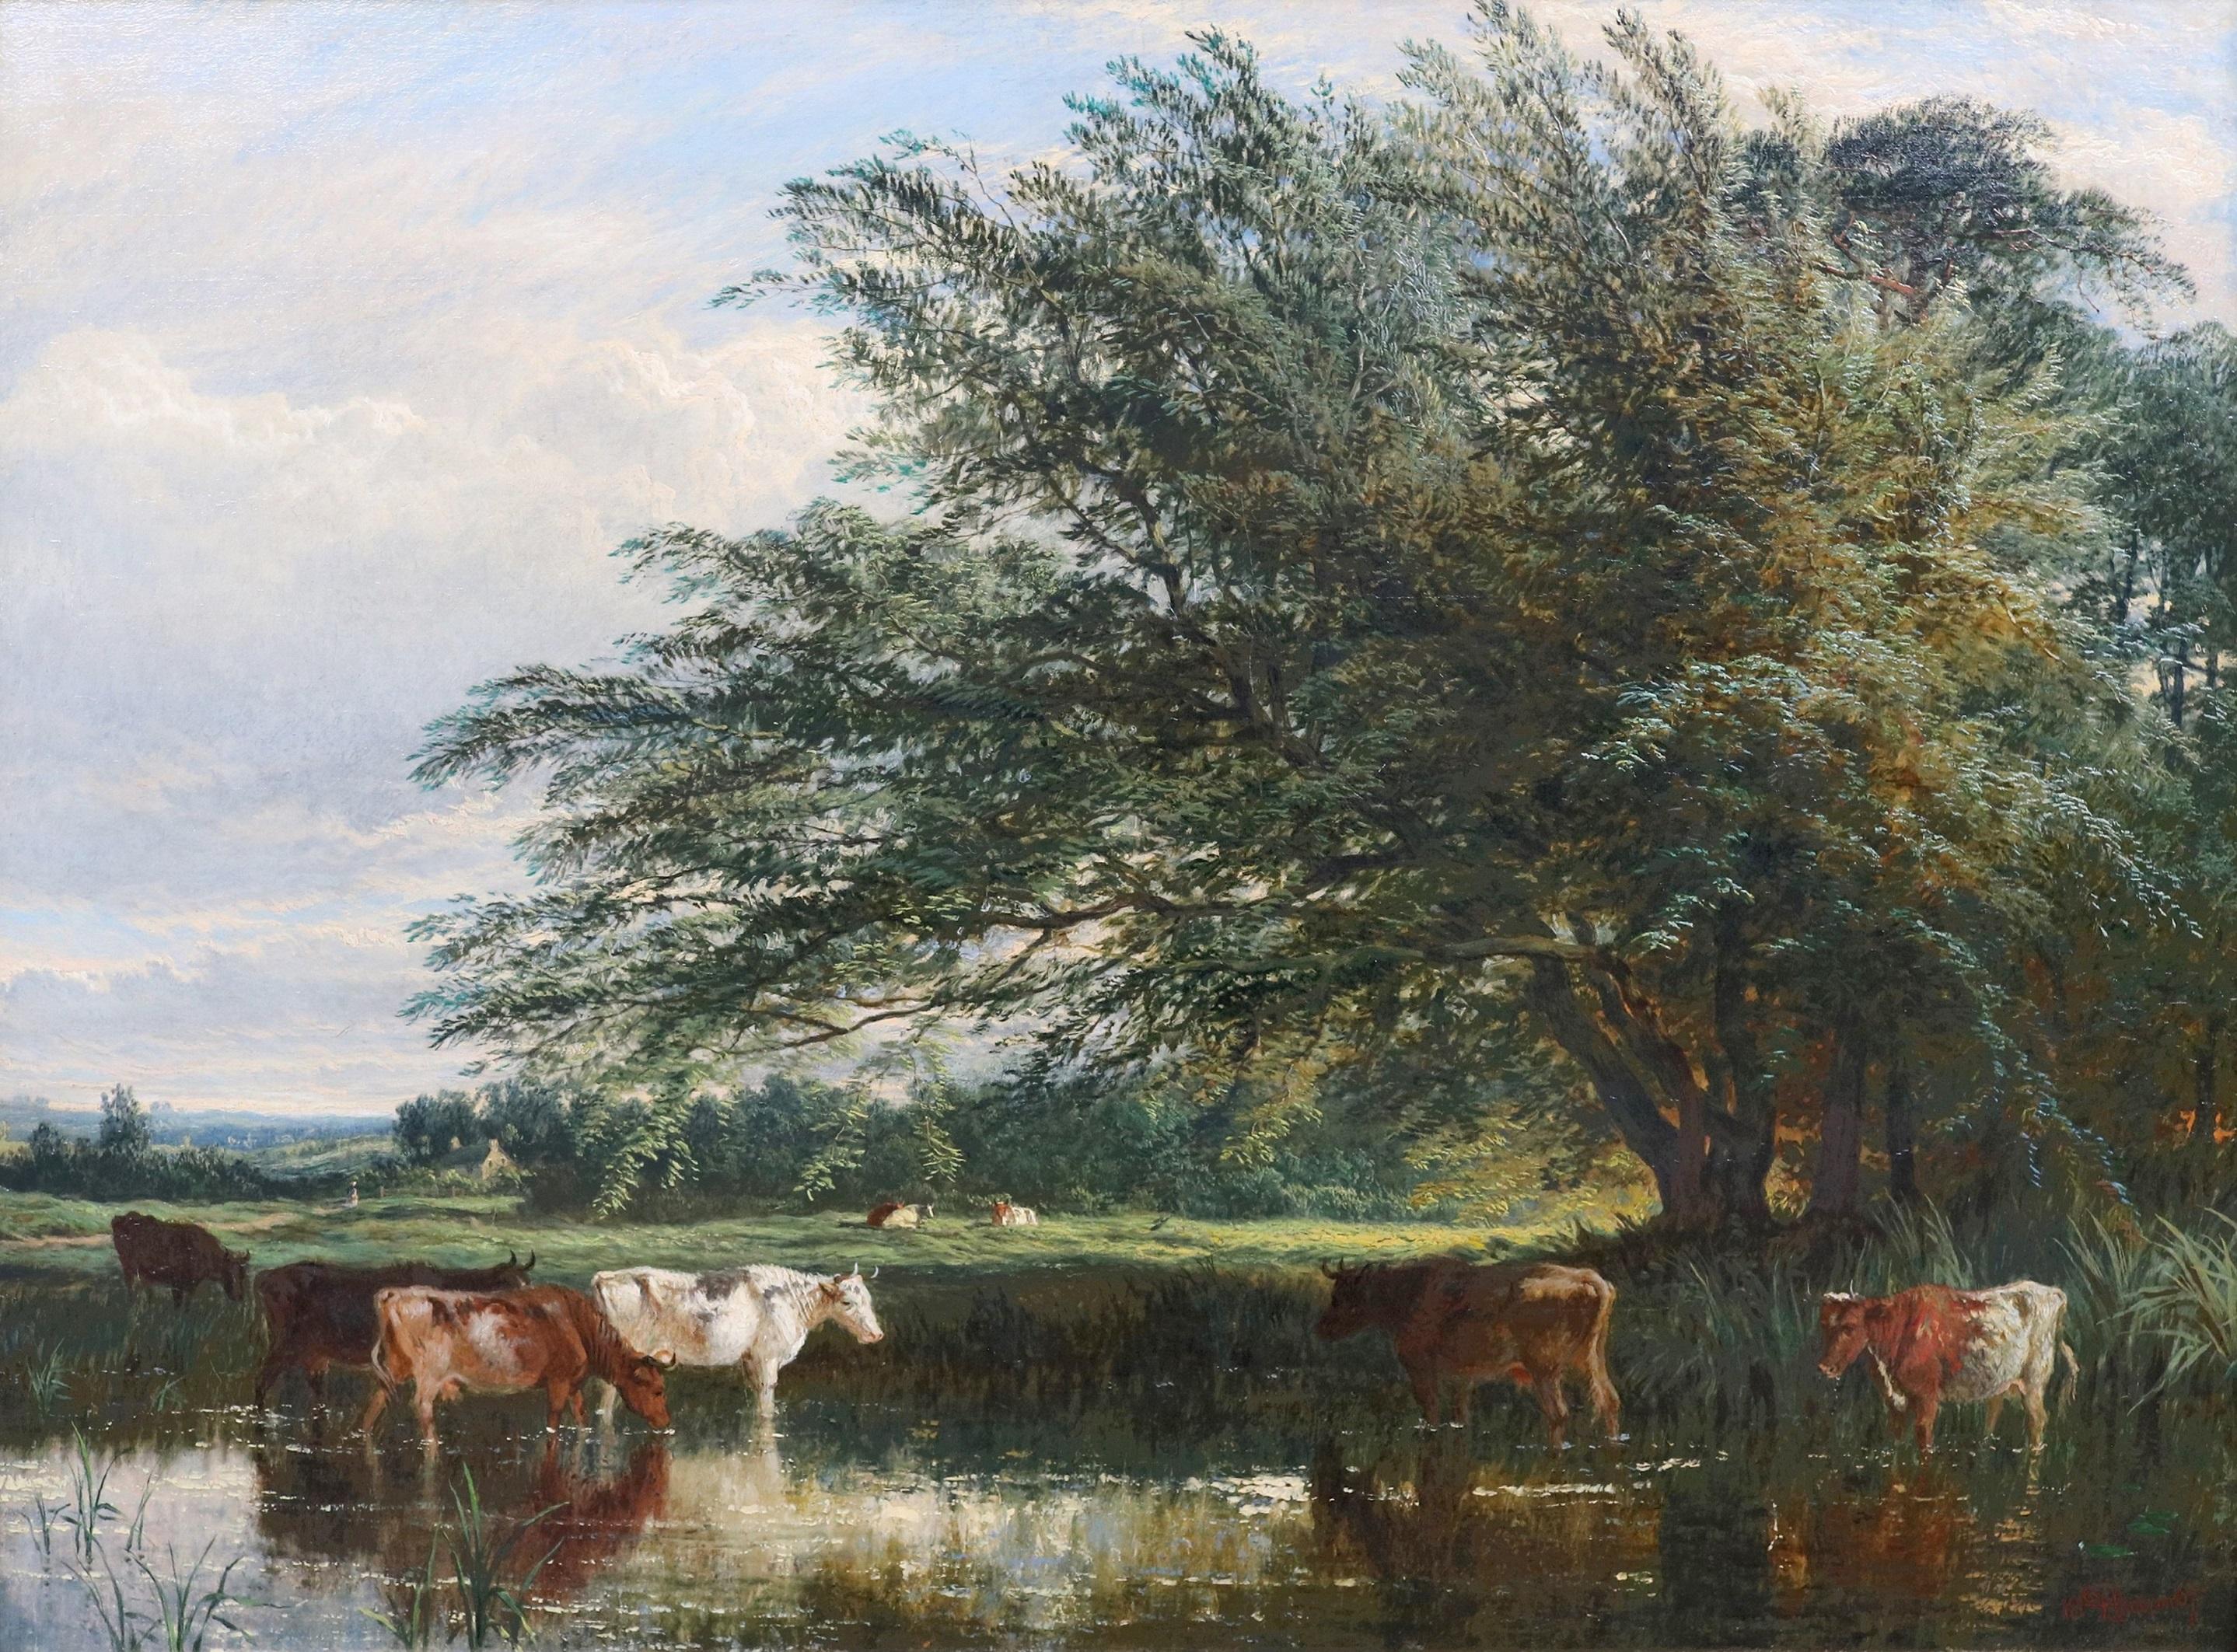 ‘On the Ribble, Summertime’ by Henry Dawson R.B.A. (1811-1878). 

The painting – which depicts cattle in the shade of a large tree on the river Ribble in Lancashire – is signed by the artist and dated 1867.

Although a student of James Baker Pyne